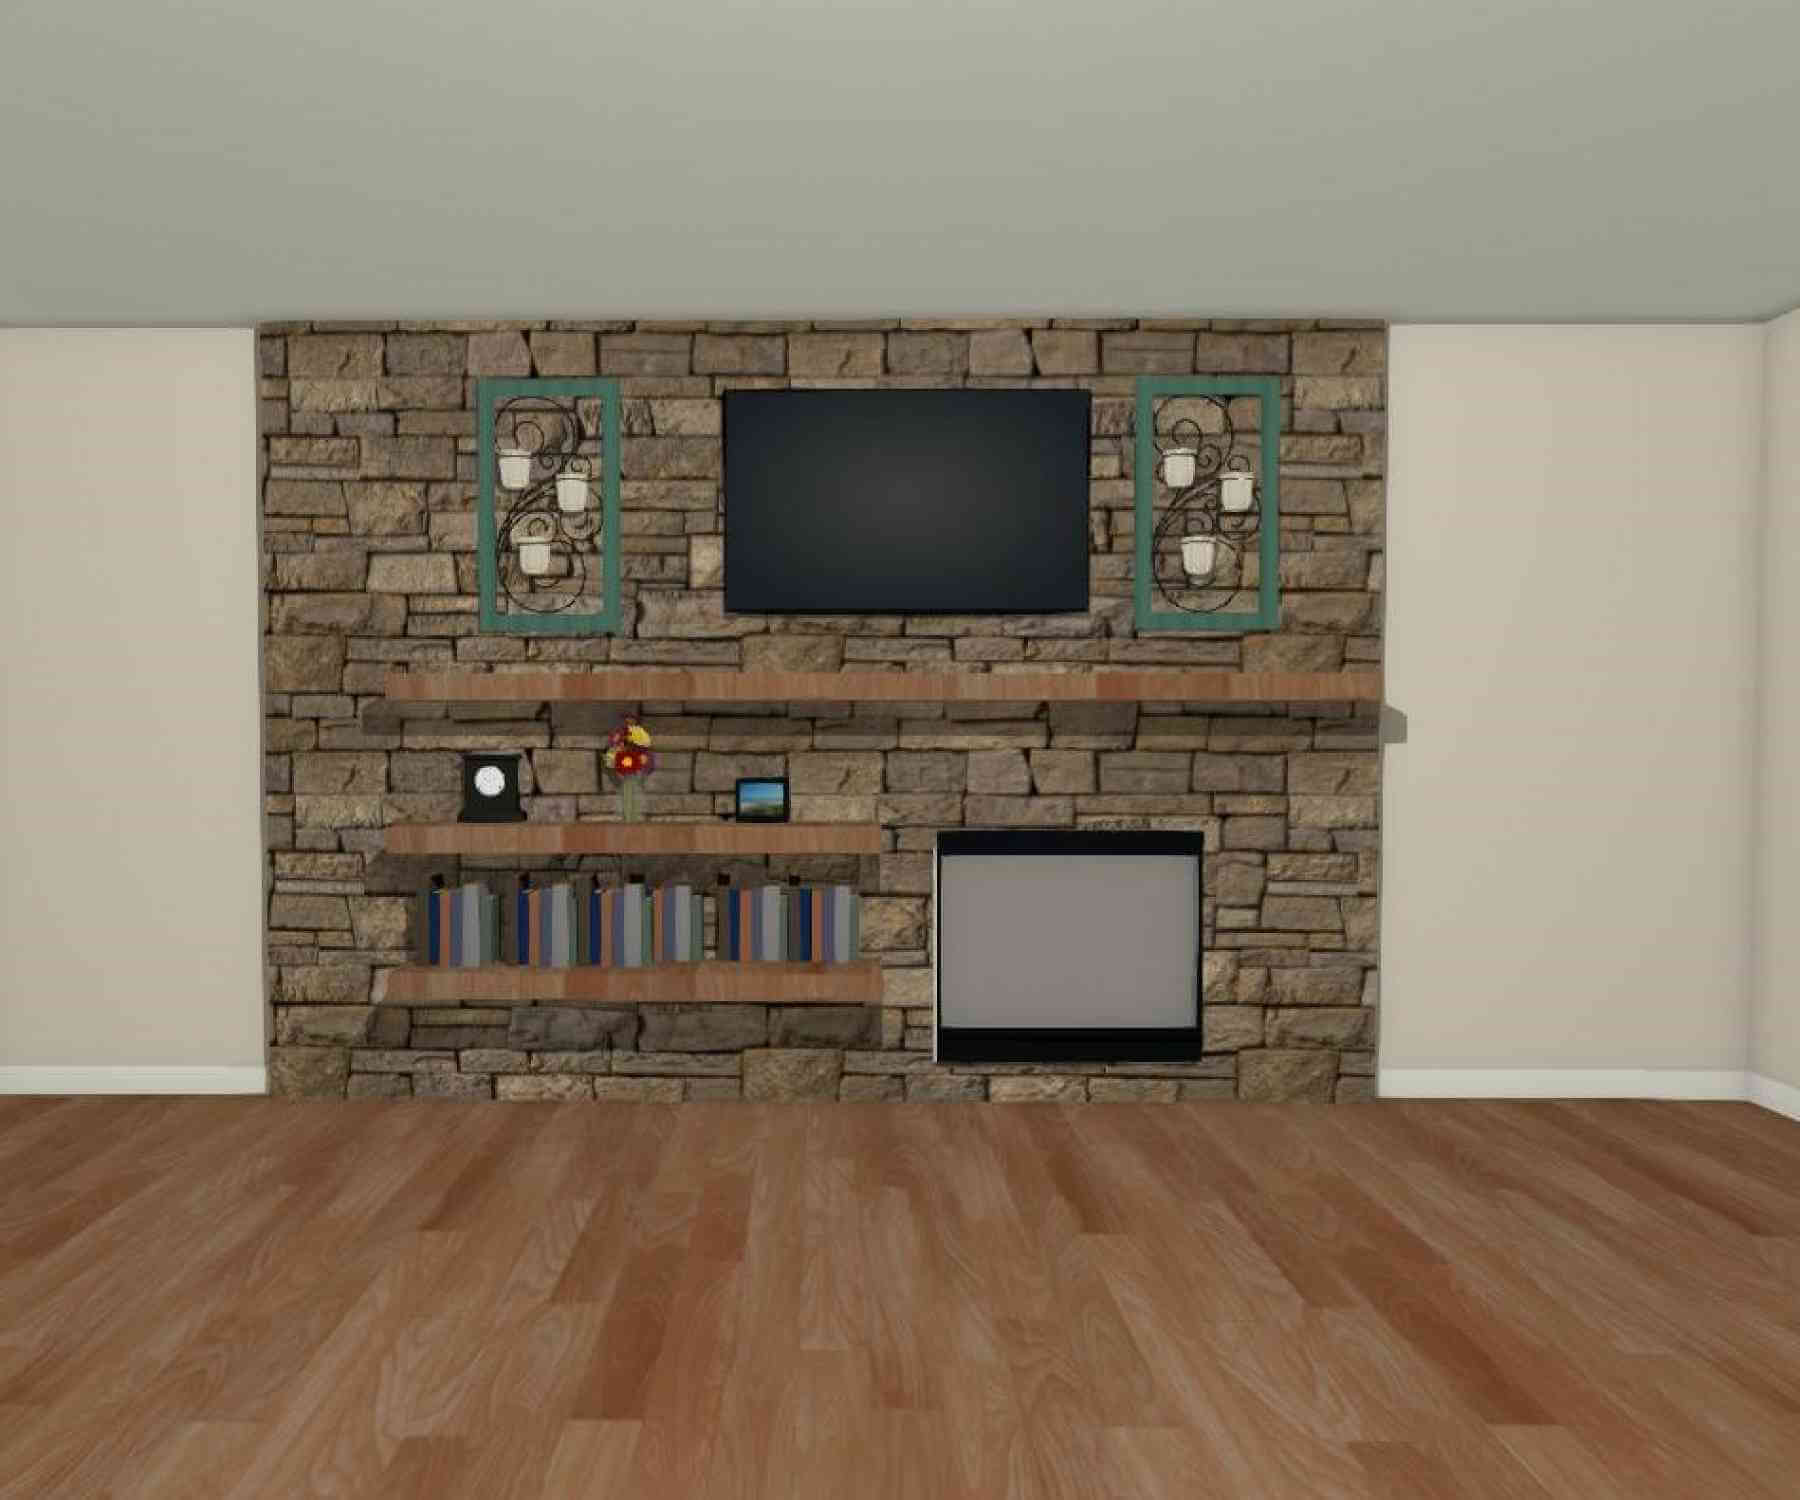 The Fireplace Wall Rendering